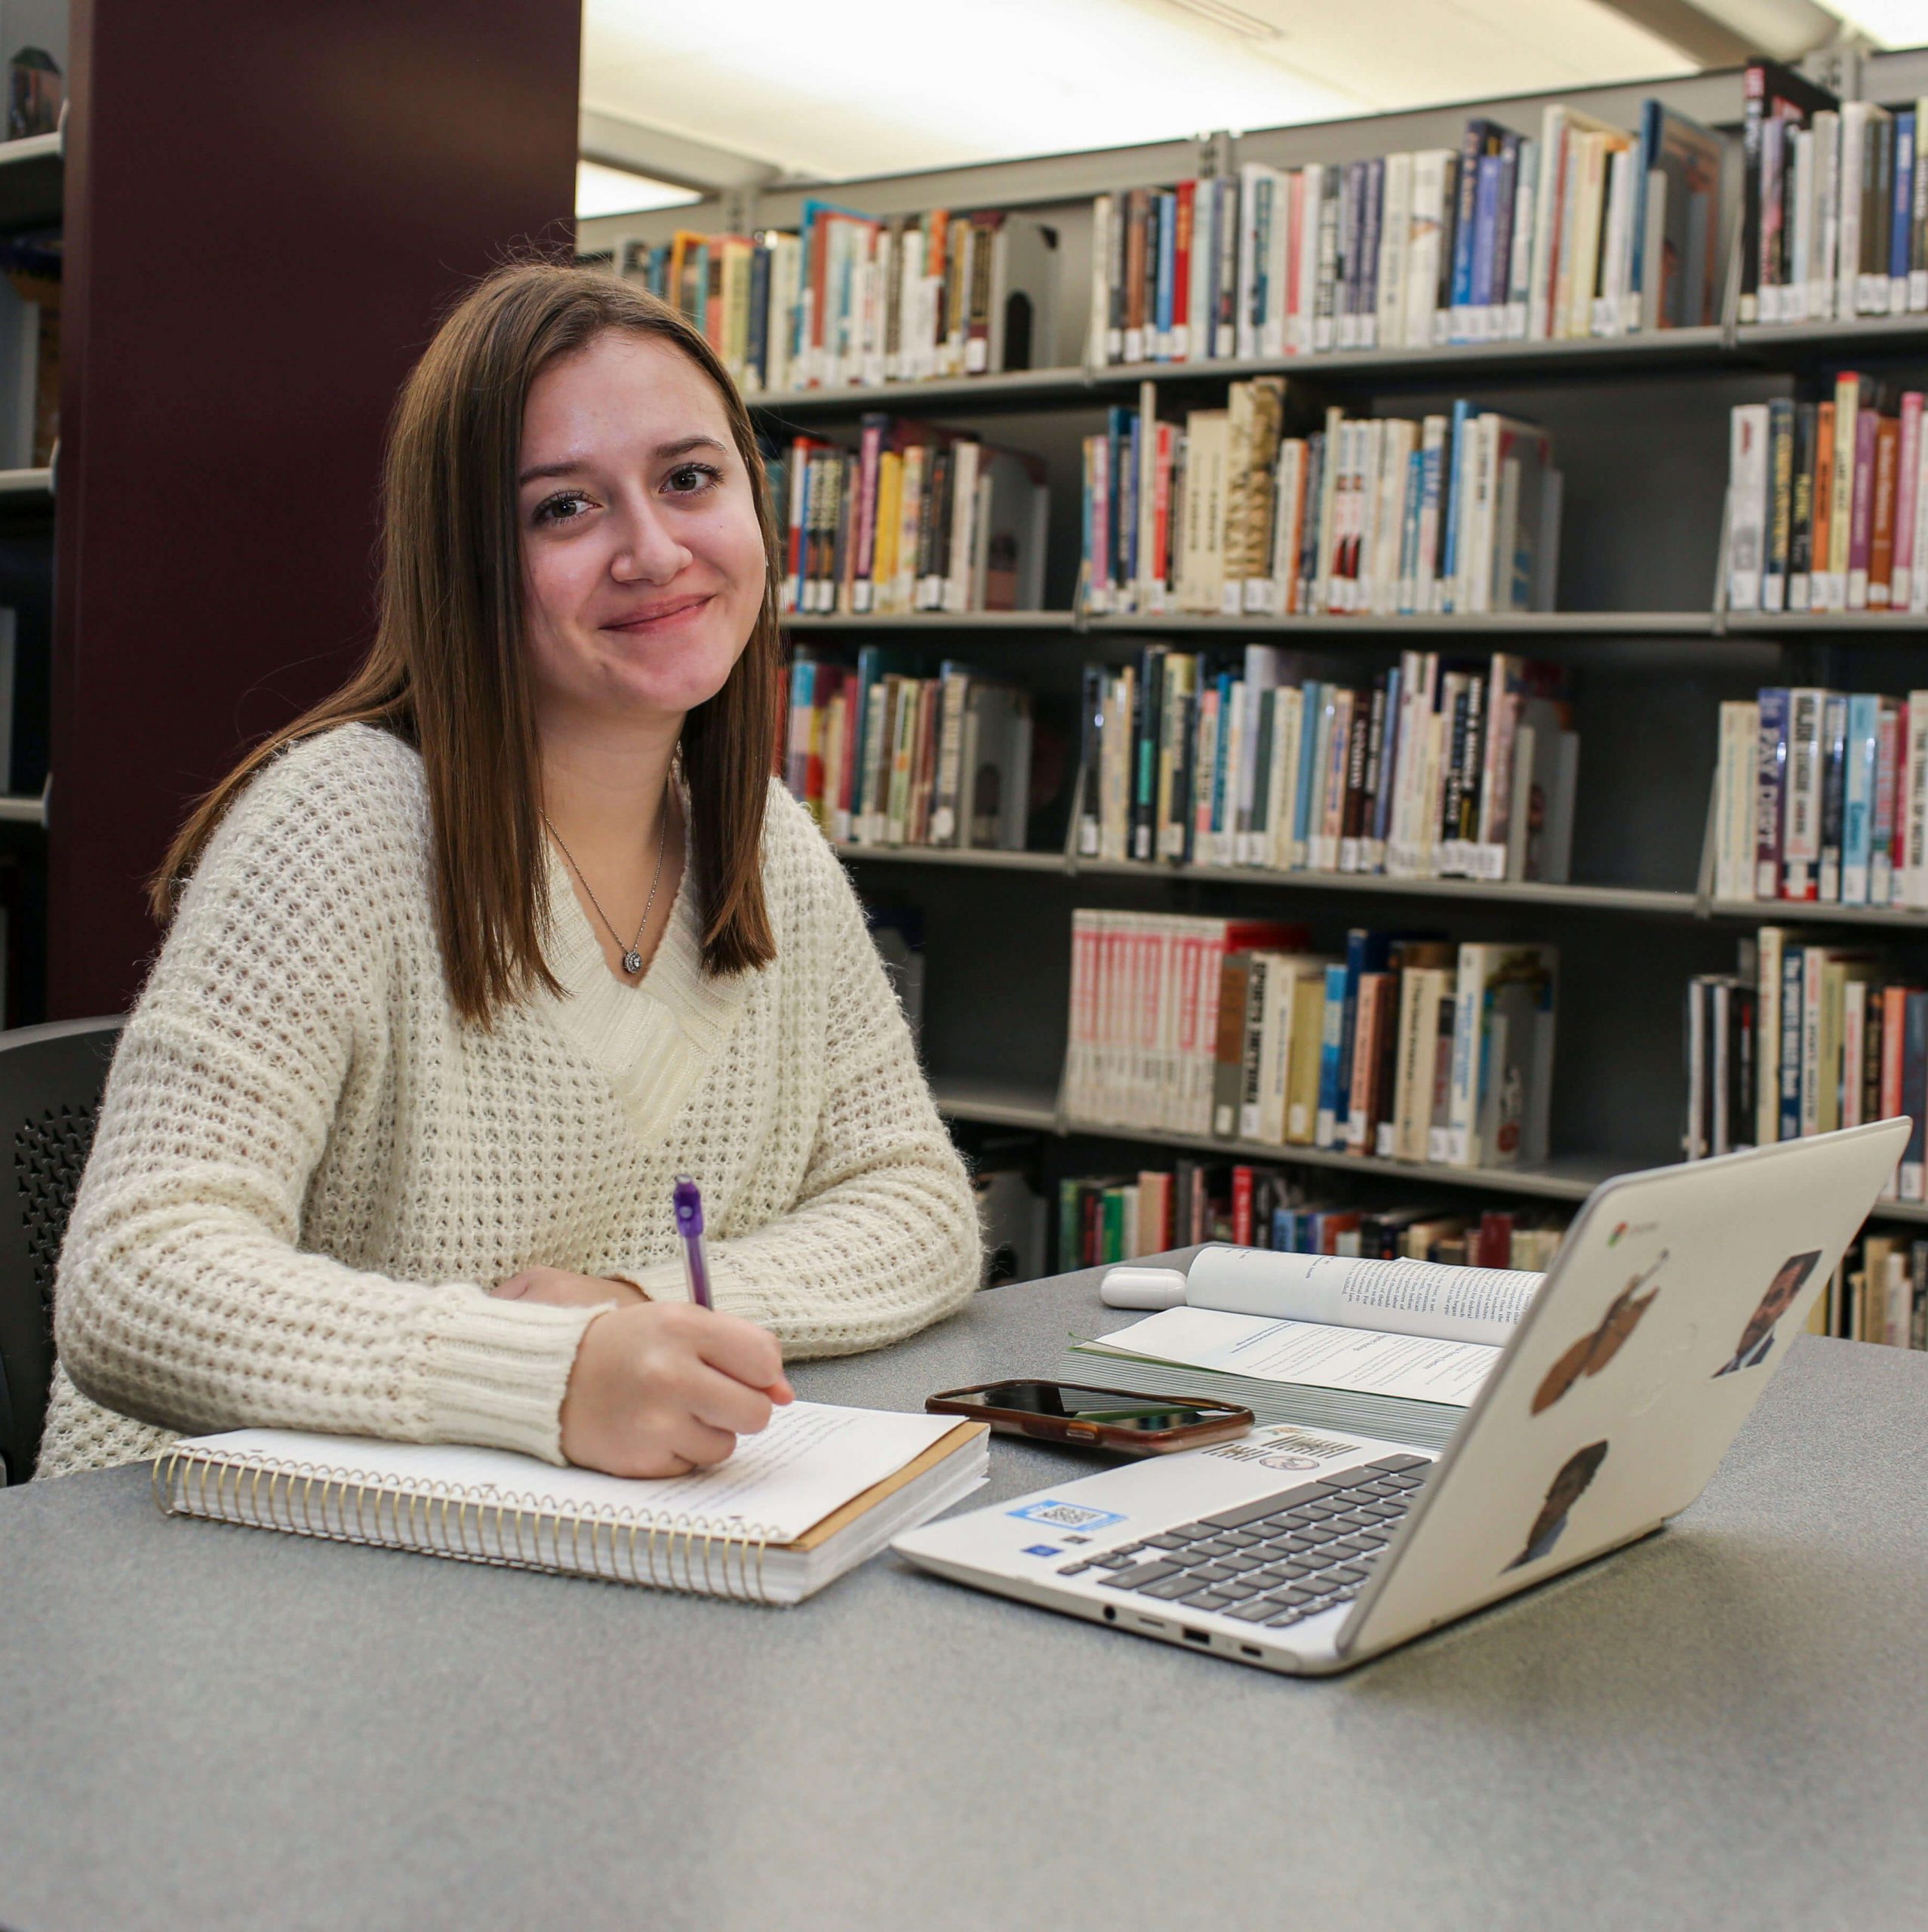 SWIC file photo of a student at Belleville campus library.